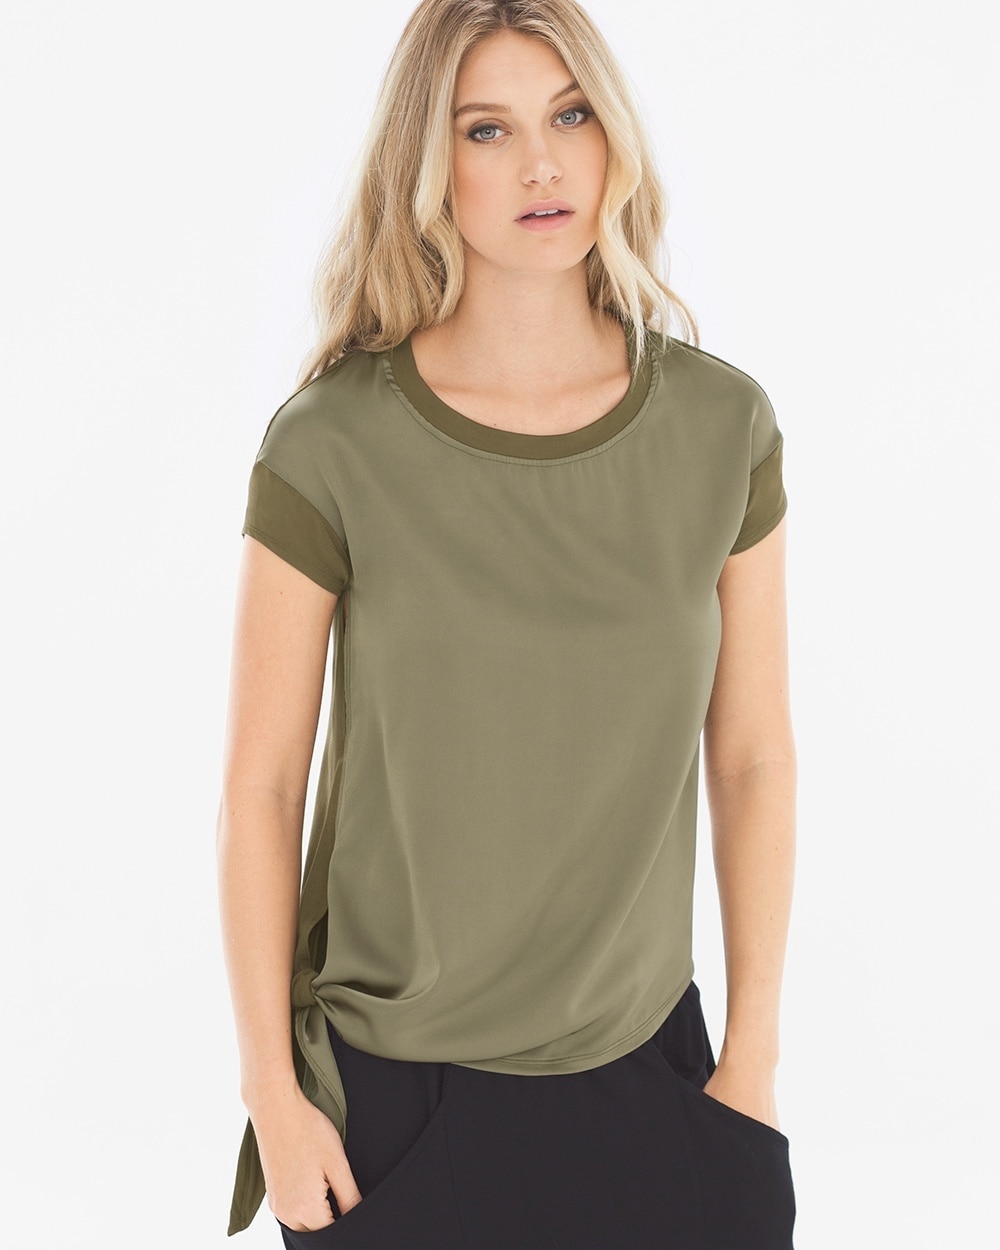 X by Gottex Fabric Mixing Short Sleeve Tee